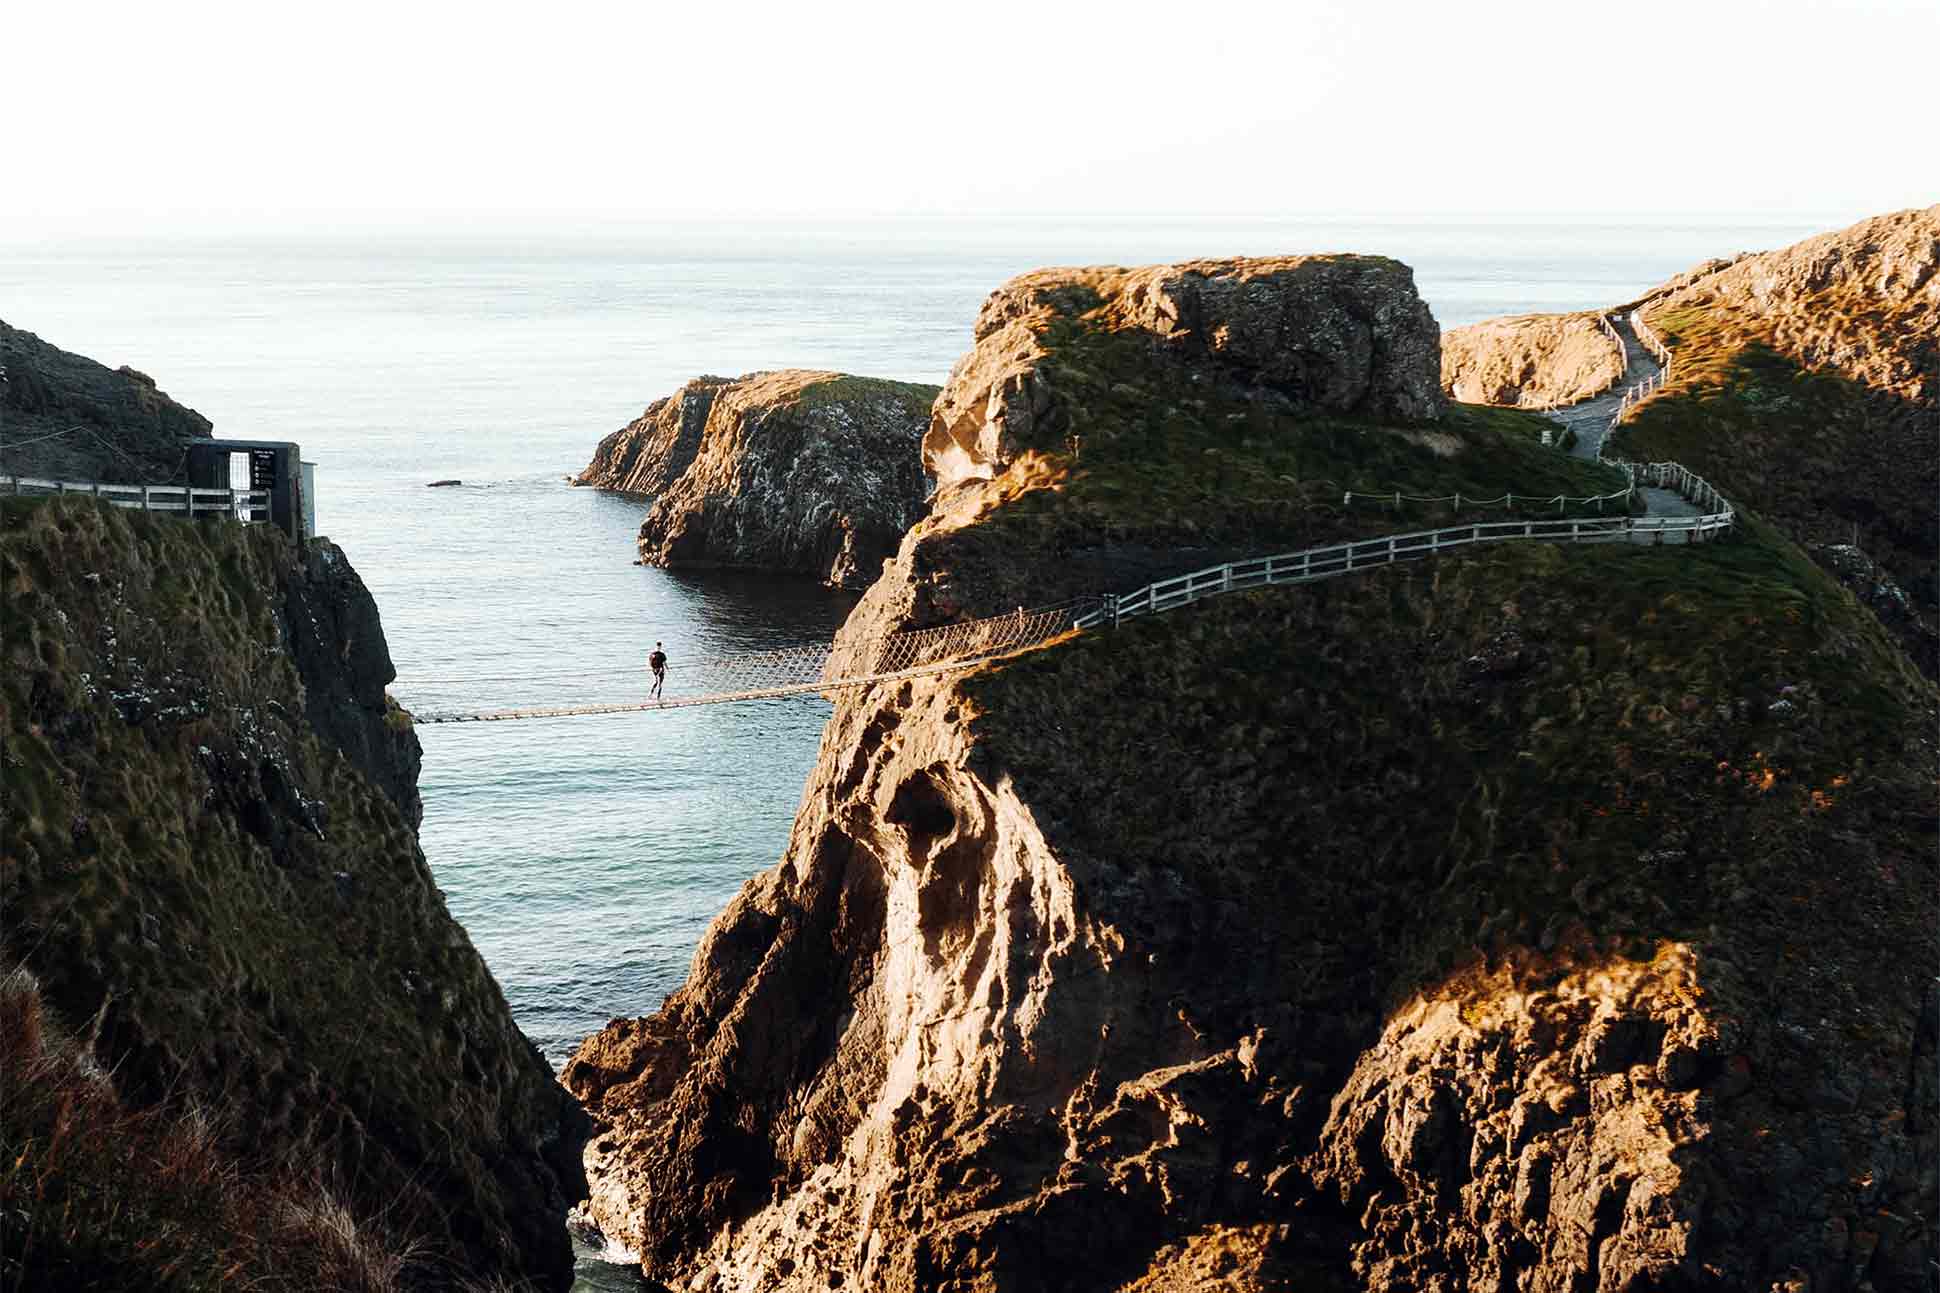 A hiker explores the Carrick-a-Rede Rope Bridge, Northern Ireland